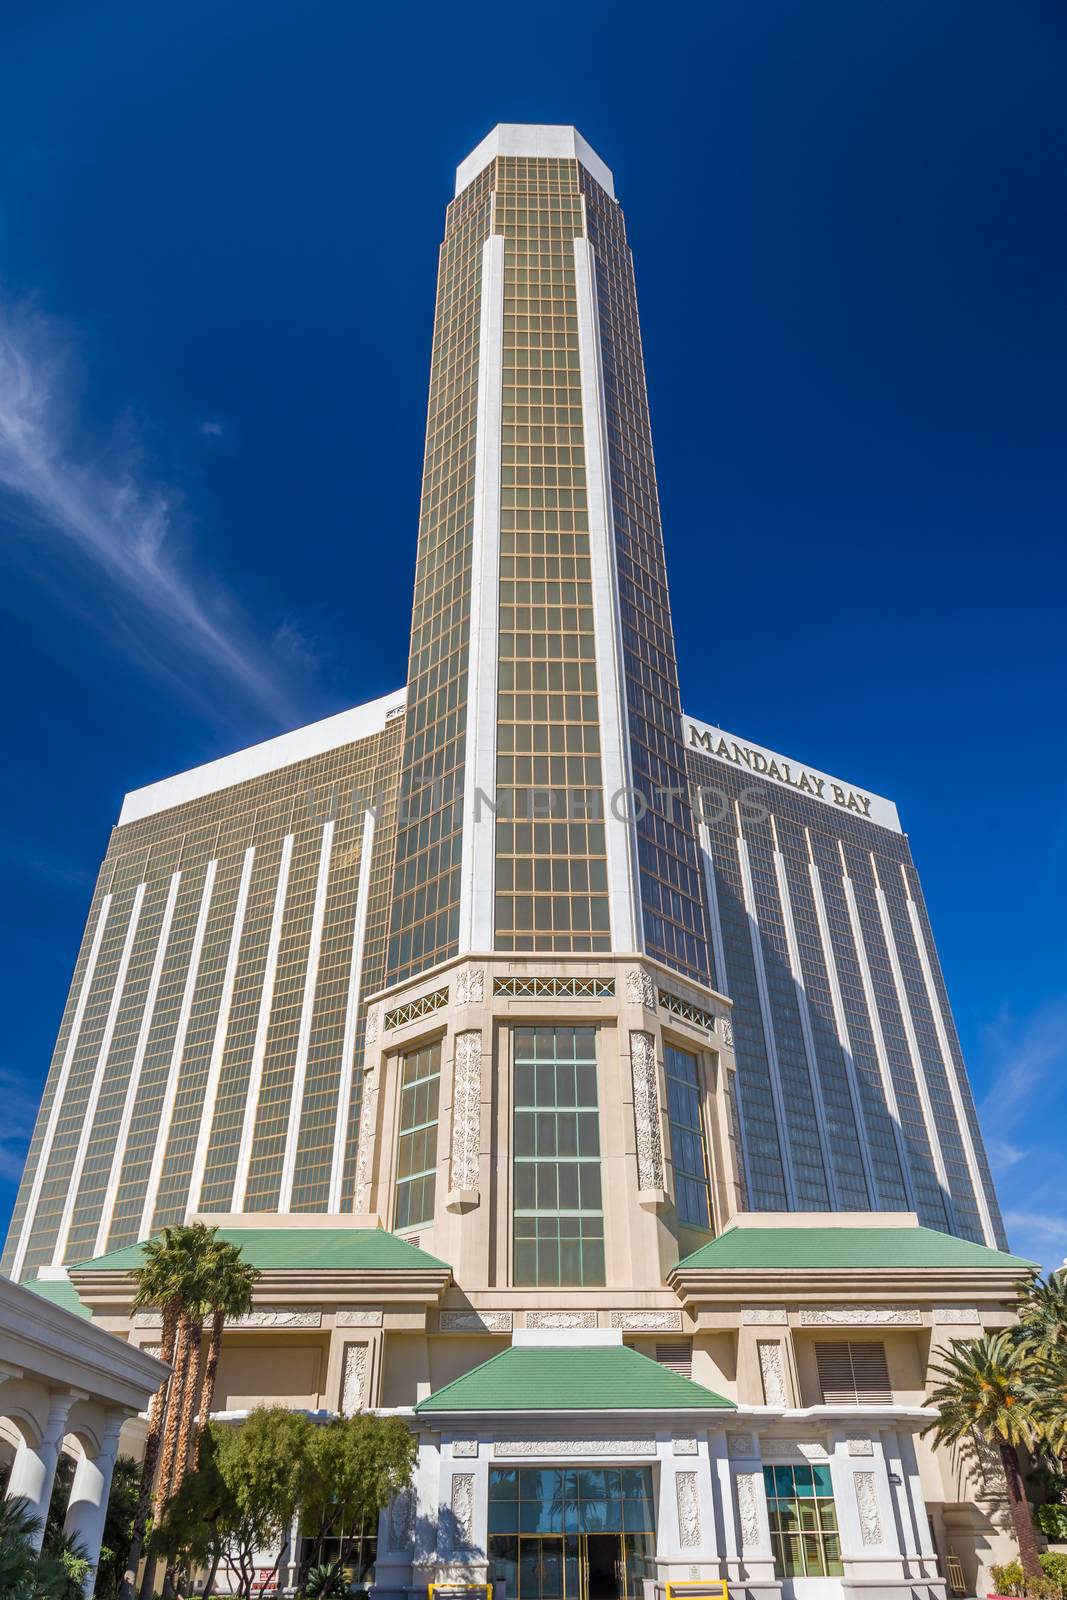 LAS VEGAS, NV/USA - FEBRUARY 15, 2016: Mandalay Bay Hotel and Casino. Mandalay Bay is on the Las Vegas Strip and is owned and operated by MGM Resorts International.